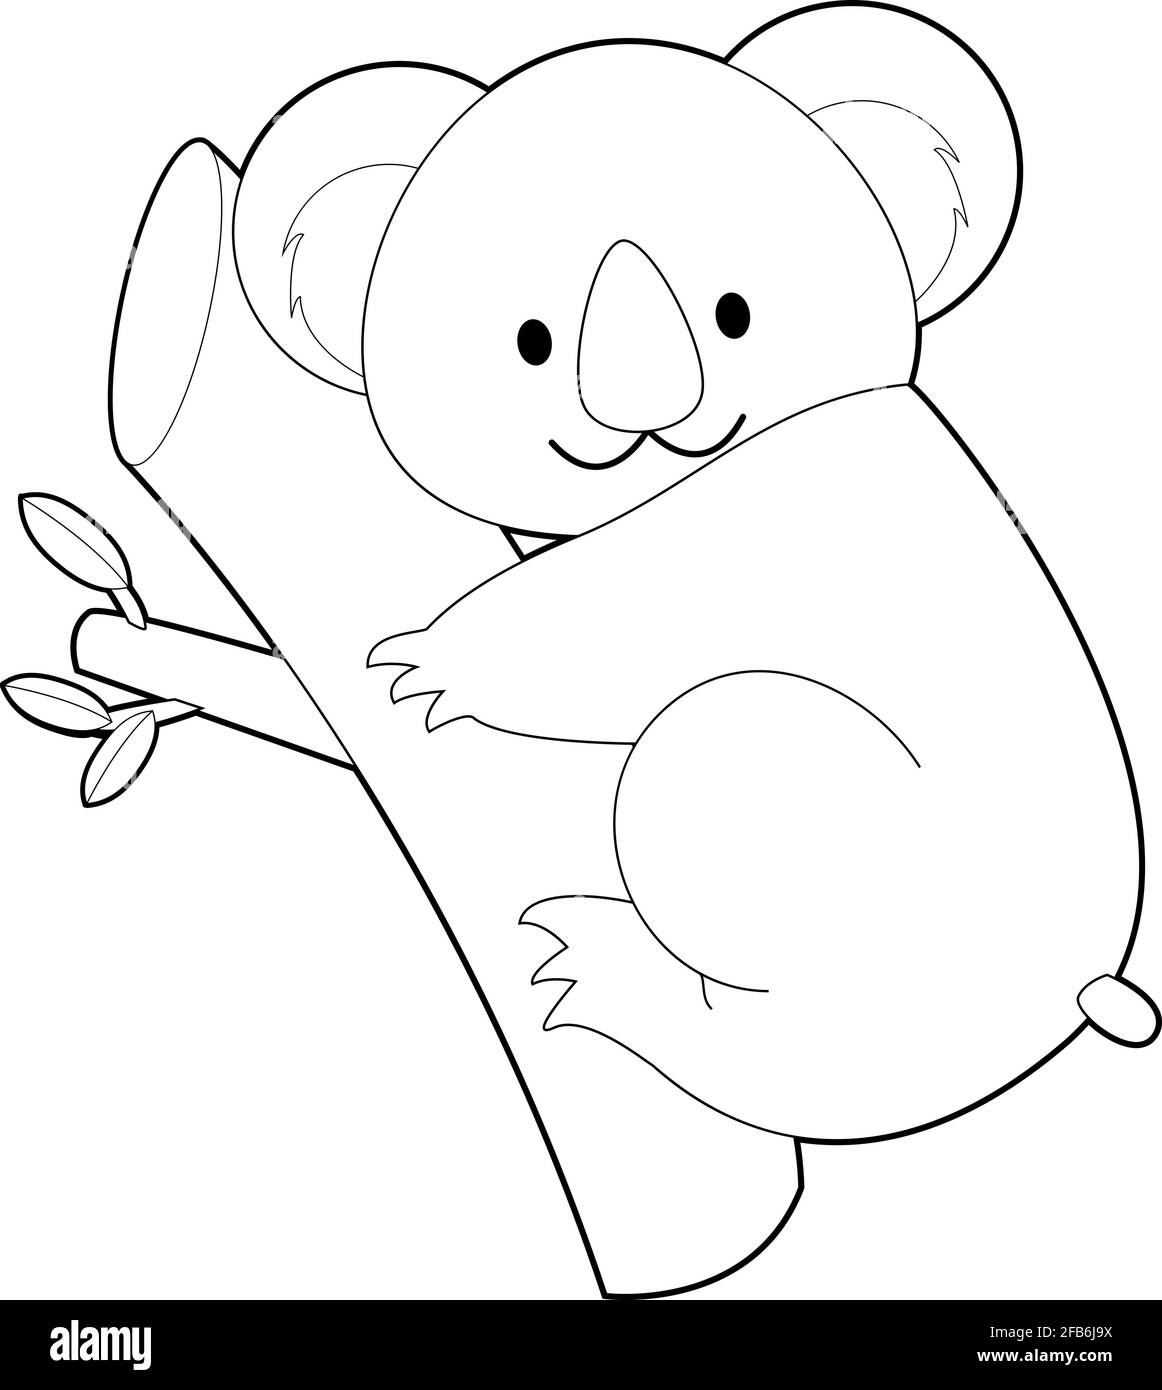 Easy Coloring drawings of animals for little kids: Koala Stock ...